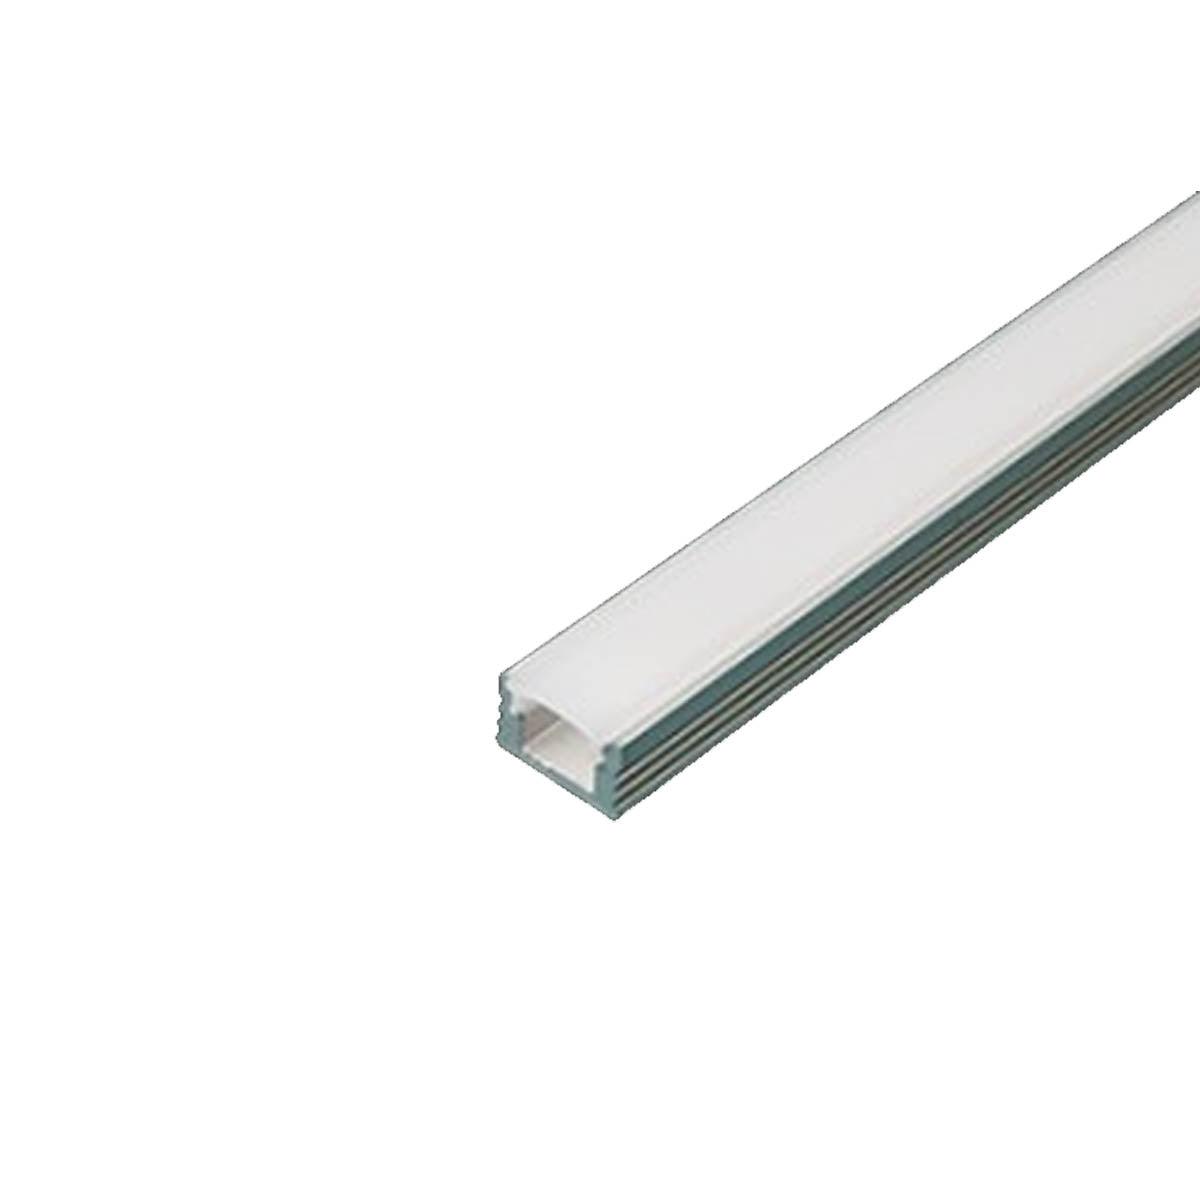 Two End Caps for LED-CHL 4ft or 8ft Channels